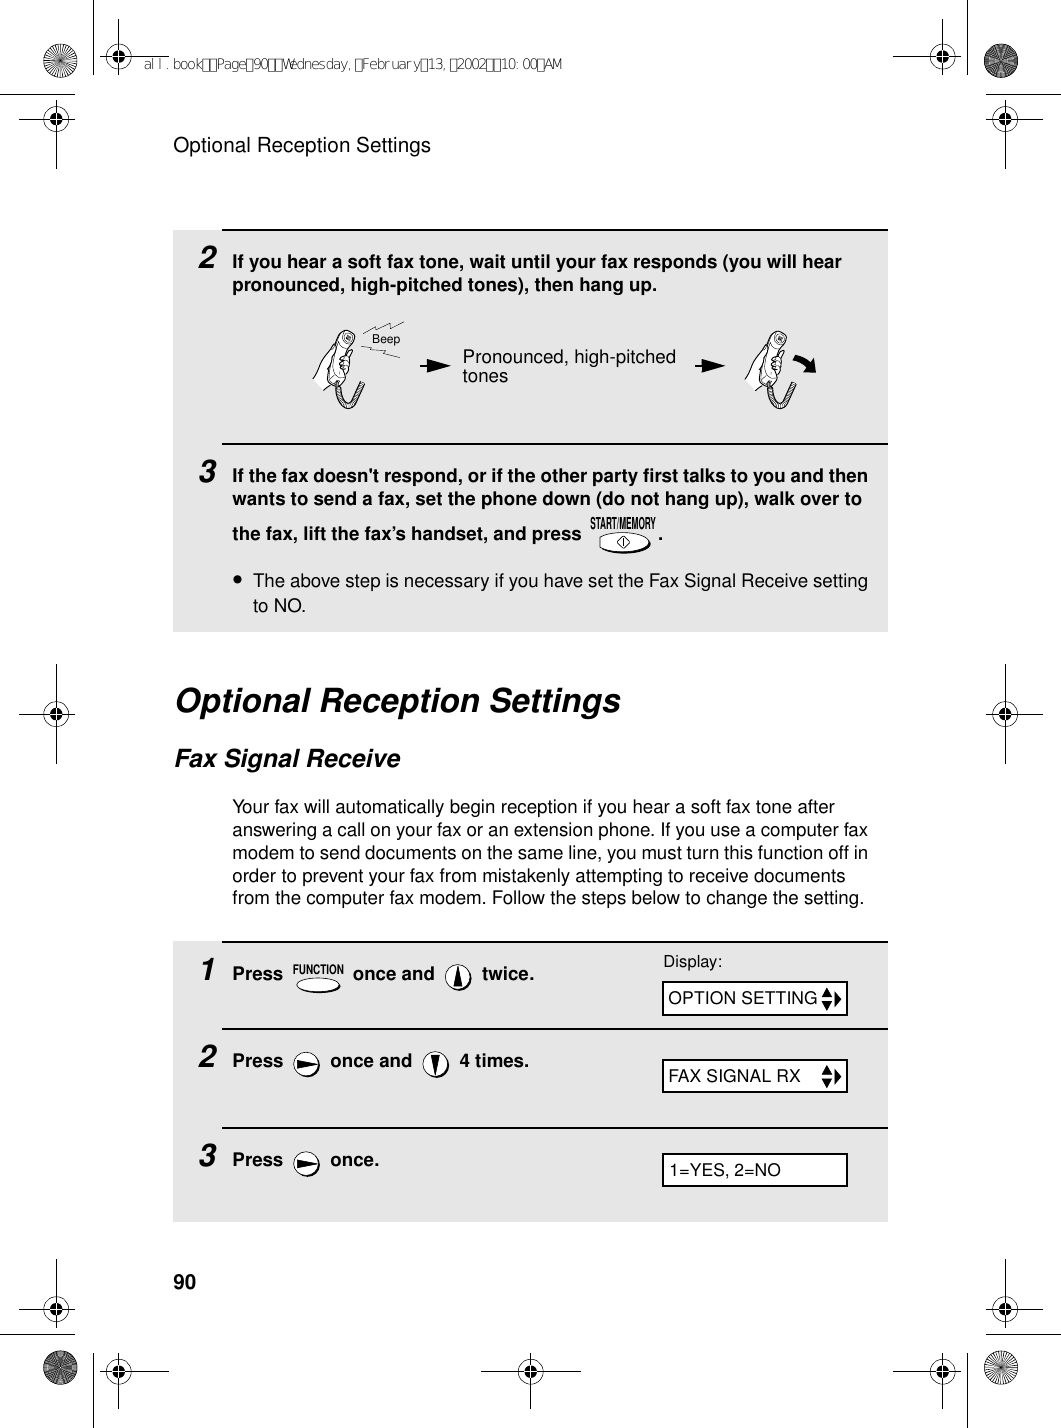 Optional Reception Settings902If you hear a soft fax tone, wait until your fax responds (you will hear pronounced, high-pitched tones), then hang up.3If the fax doesn&apos;t respond, or if the other party first talks to you and then wants to send a fax, set the phone down (do not hang up), walk over to the fax, lift the fax’s handset, and press  .•The above step is necessary if you have set the Fax Signal Receive setting to NO.START/MEMORYPronounced, high-pitched tonesBeepOptional Reception SettingsFax Signal ReceiveYour fax will automatically begin reception if you hear a soft fax tone after answering a call on your fax or an extension phone. If you use a computer fax modem to send documents on the same line, you must turn this function off in order to prevent your fax from mistakenly attempting to receive documents from the computer fax modem. Follow the steps below to change the setting.1Press   once and   twice.2Press   once and   4 times.3Press  once.FUNCTIONDisplay:OPTION SETTINGFAX SIGNAL RX1=YES, 2=NOall.bookPage90Wednesday,February13,200210:00AM